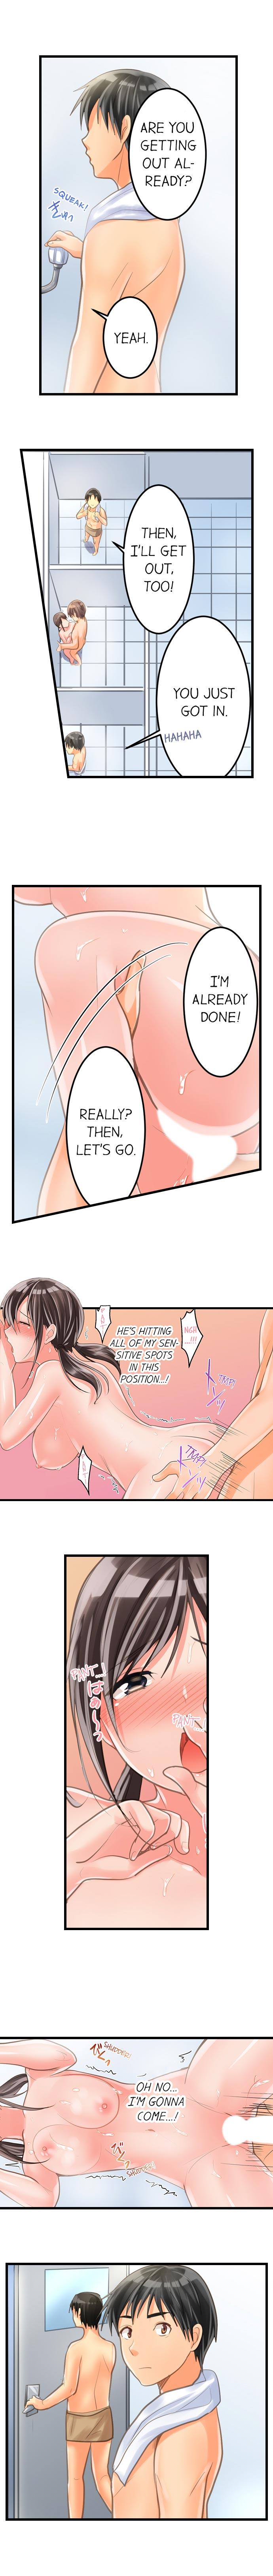 The Day She Became a Sex Toy (Complete] 53